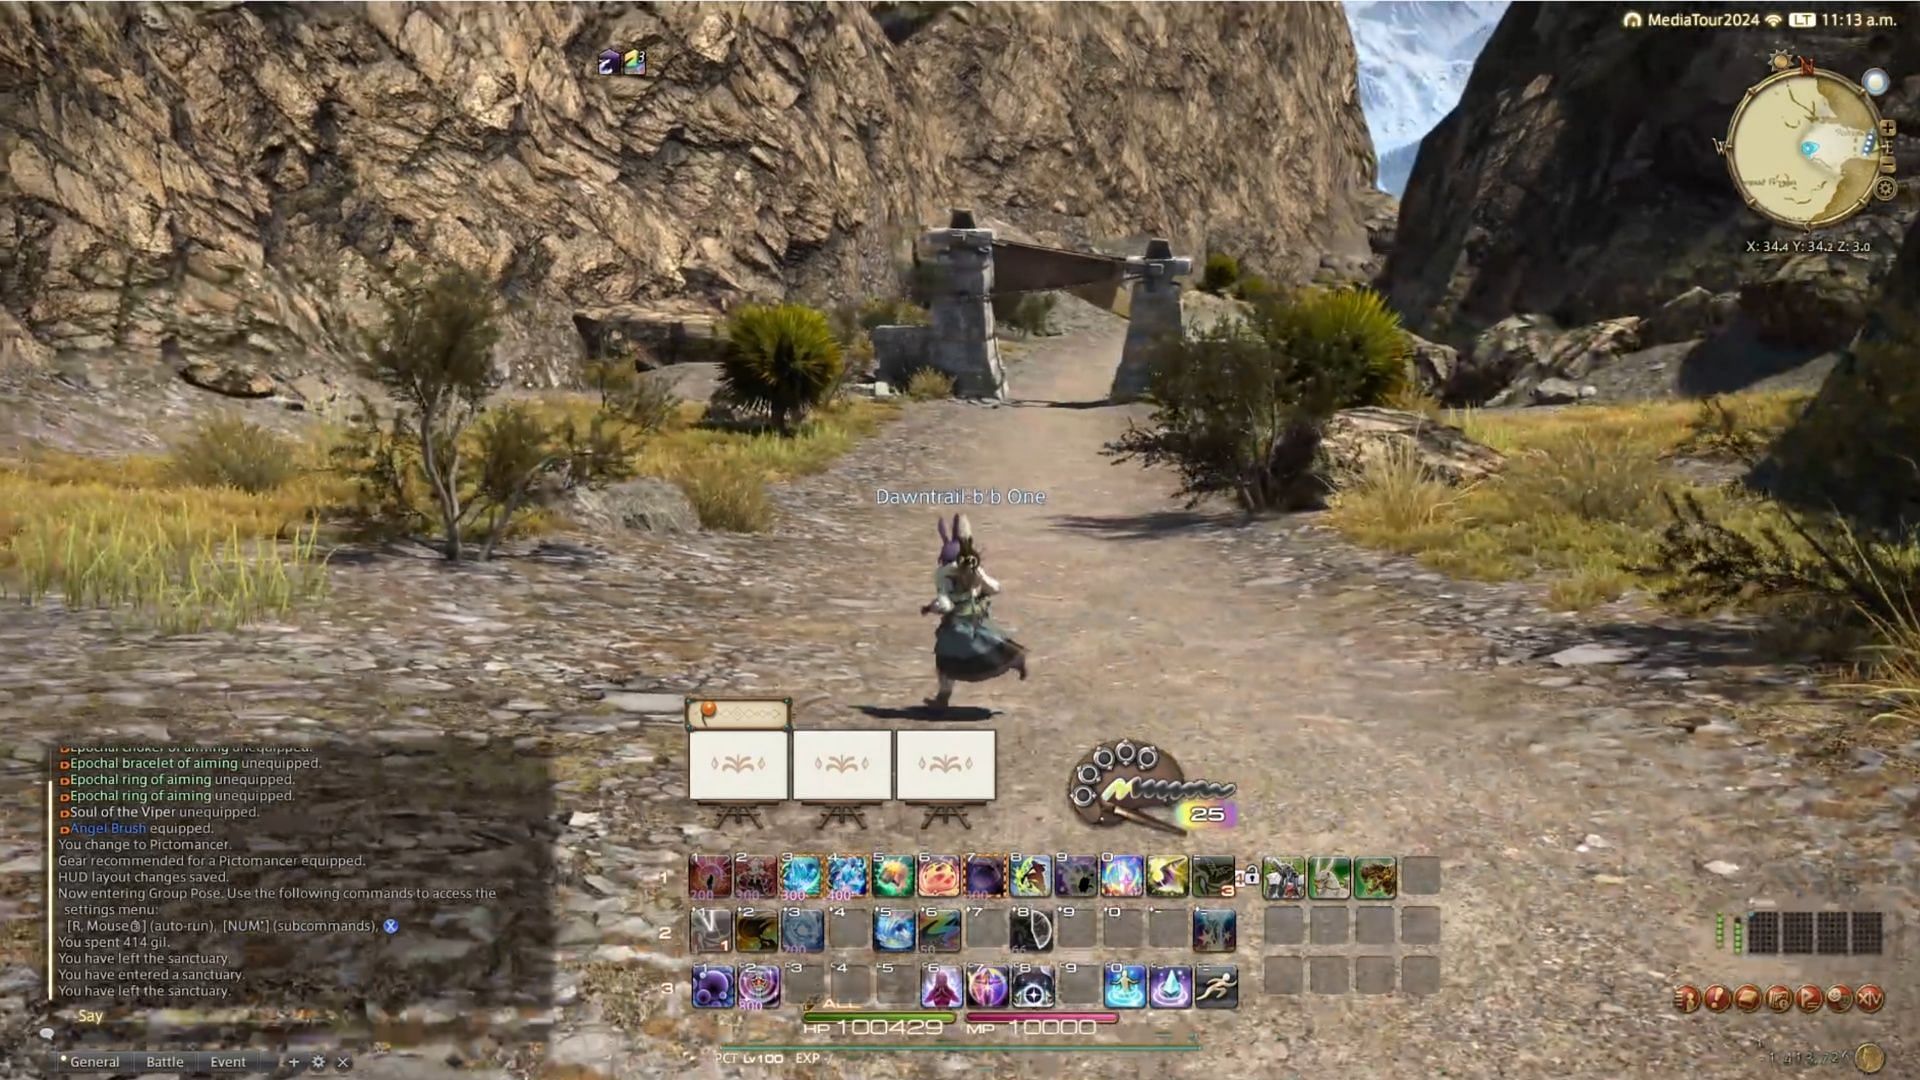 The combo buttons are going to make life a lot easier for some Final Fantasy 14 players (Image via Square Enix)